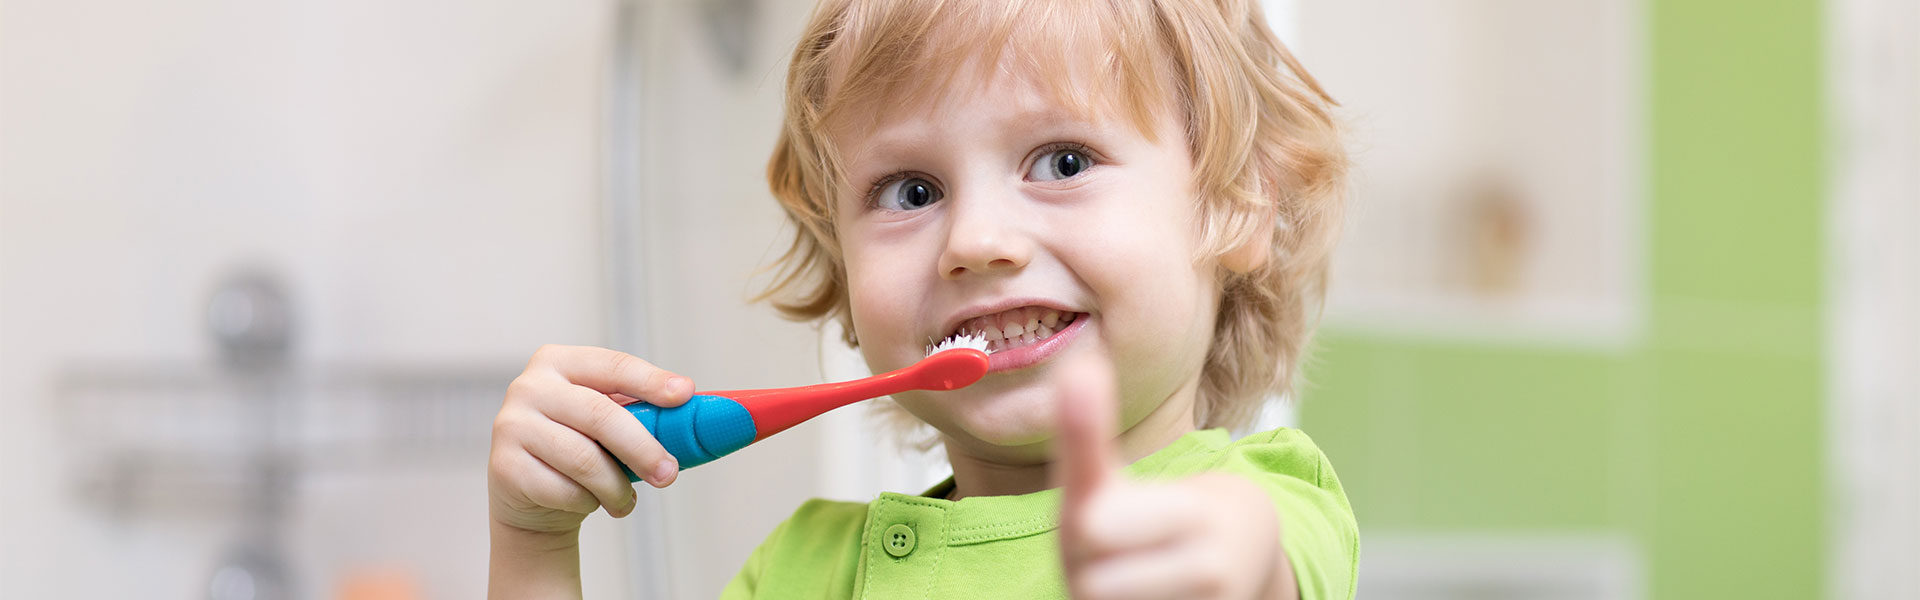 Should You Take Your Child to a Pediatric Dentist?